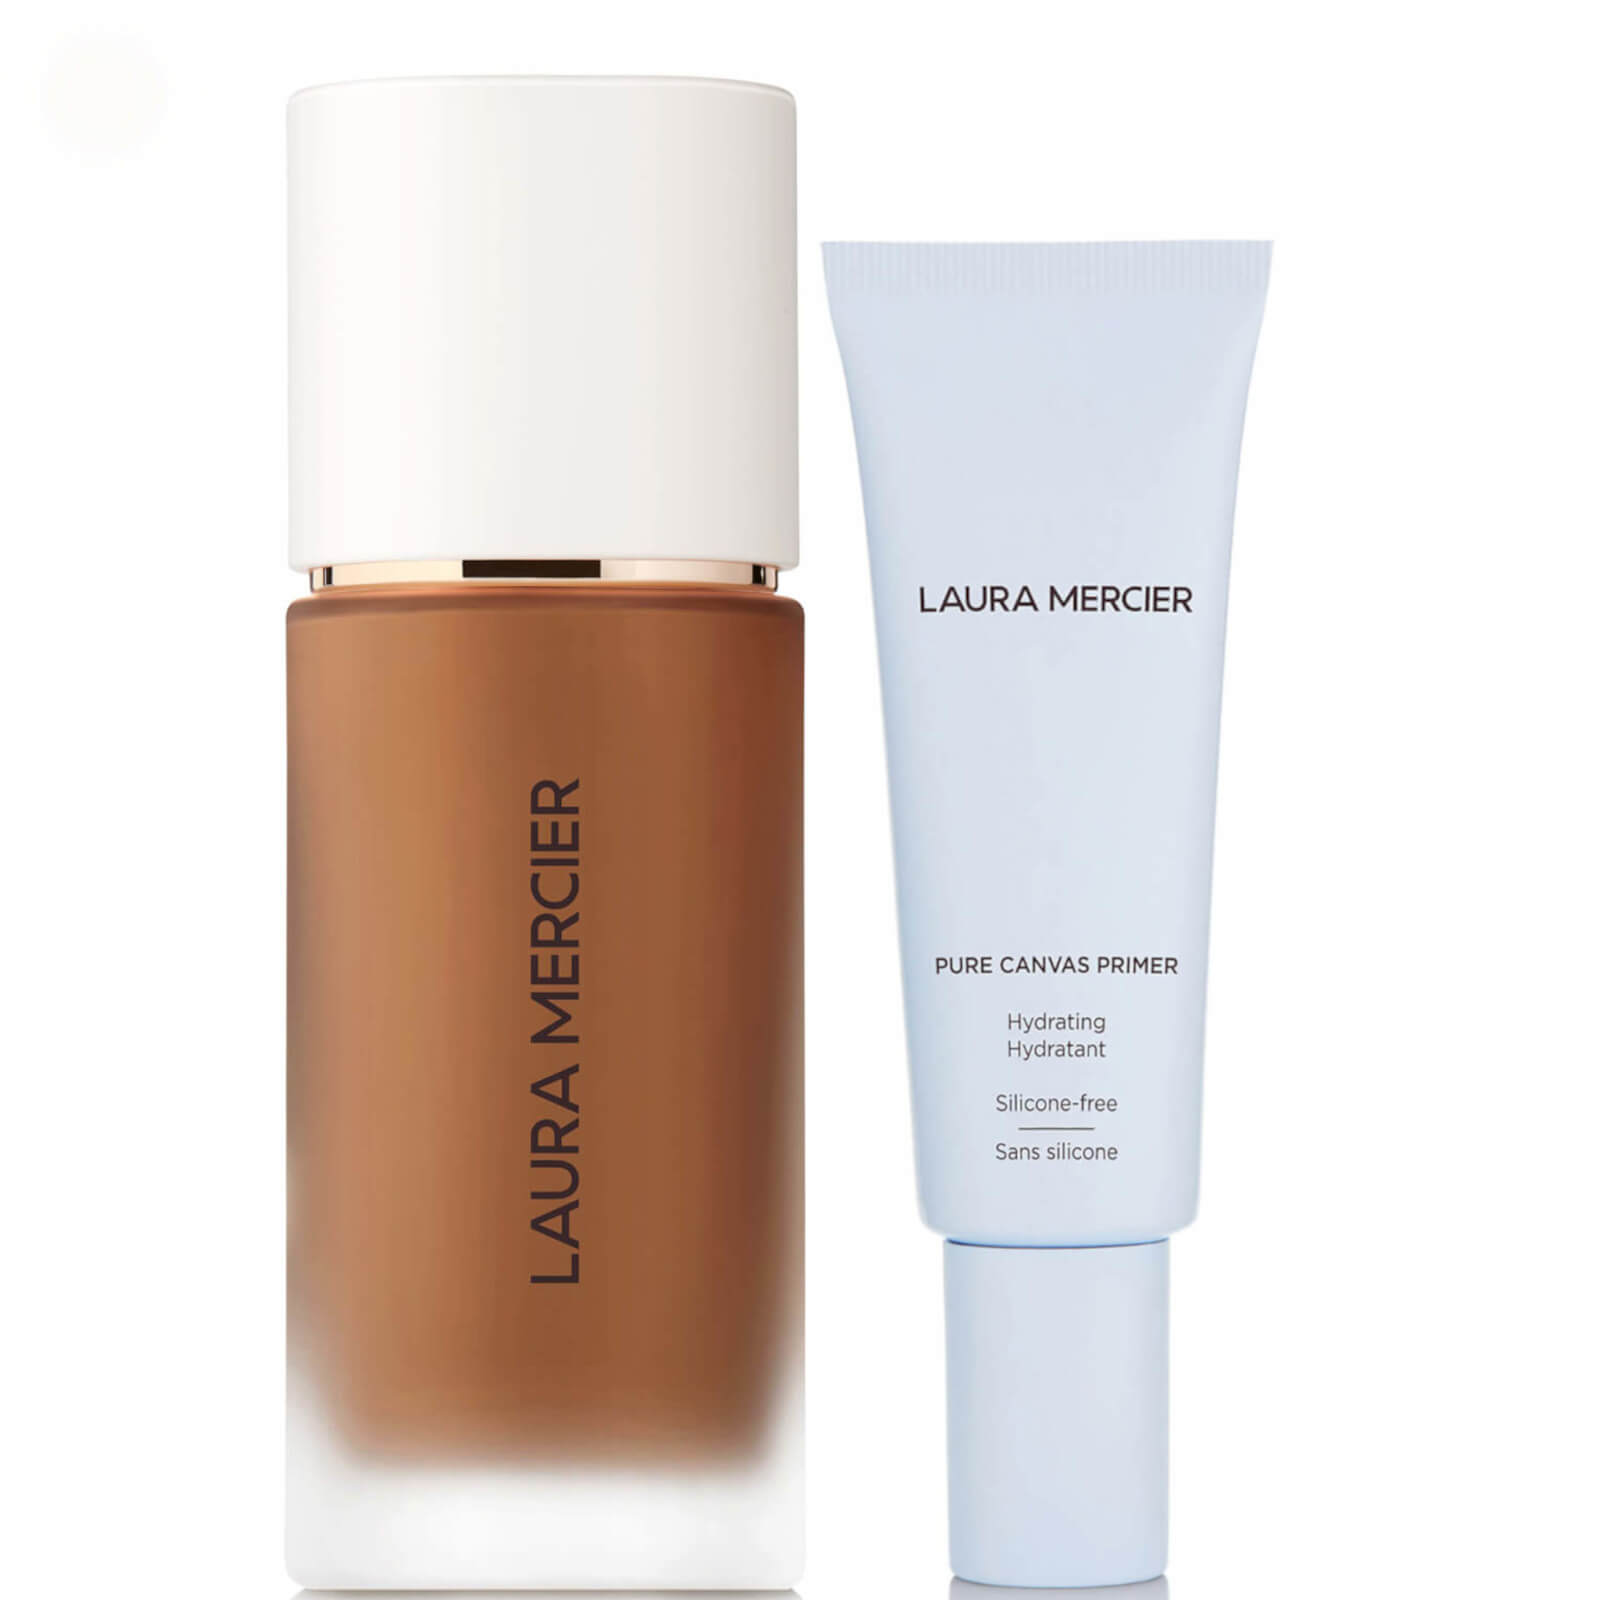 Laura Mercier Real Flawless Foundation and Pure Canvas Hydrating Primer Bundle (Various Shades) - 5W